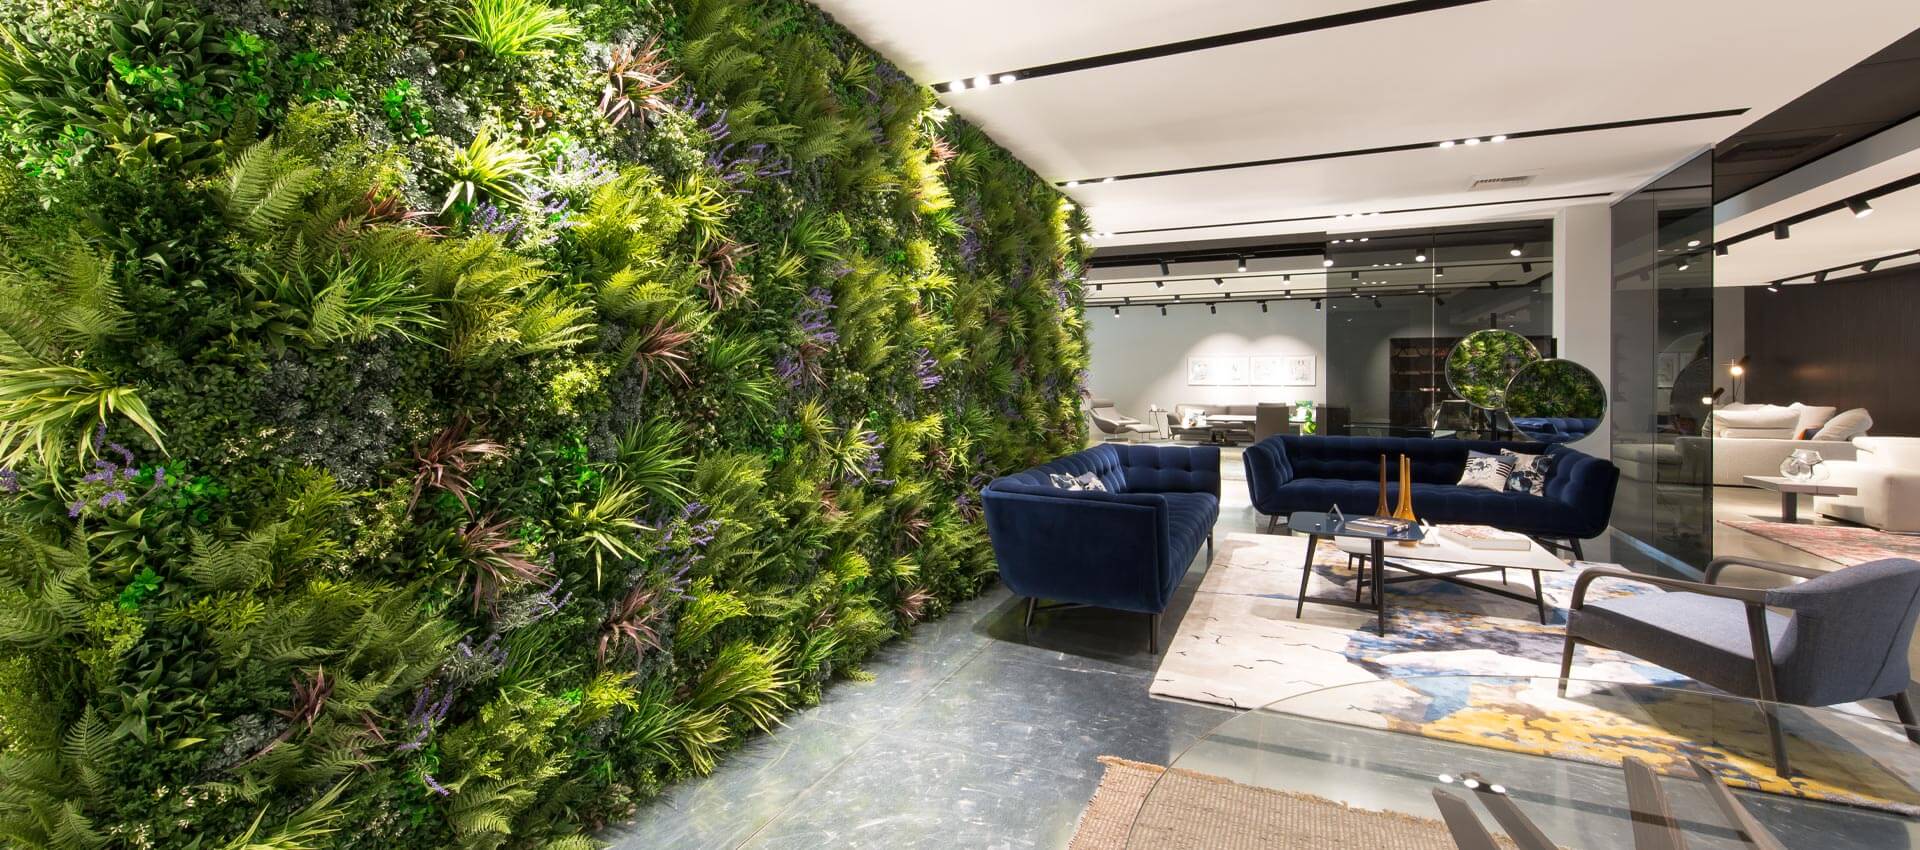 Commercial artificial living wall installed by SYNLawn